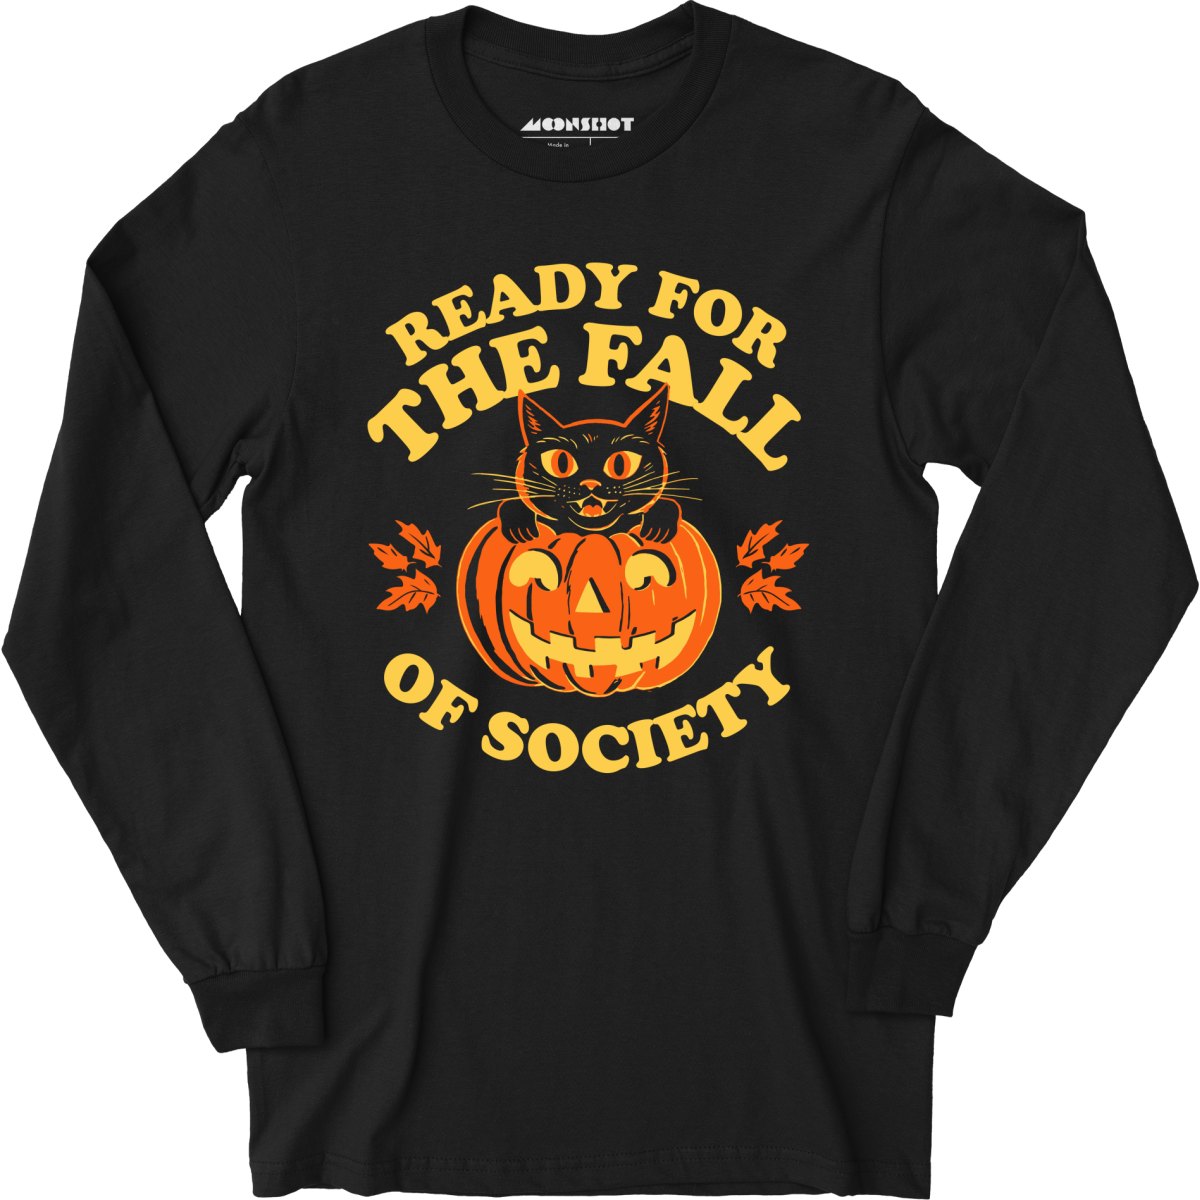 Ready For The Fall of Society - Long Sleeve T-Shirt